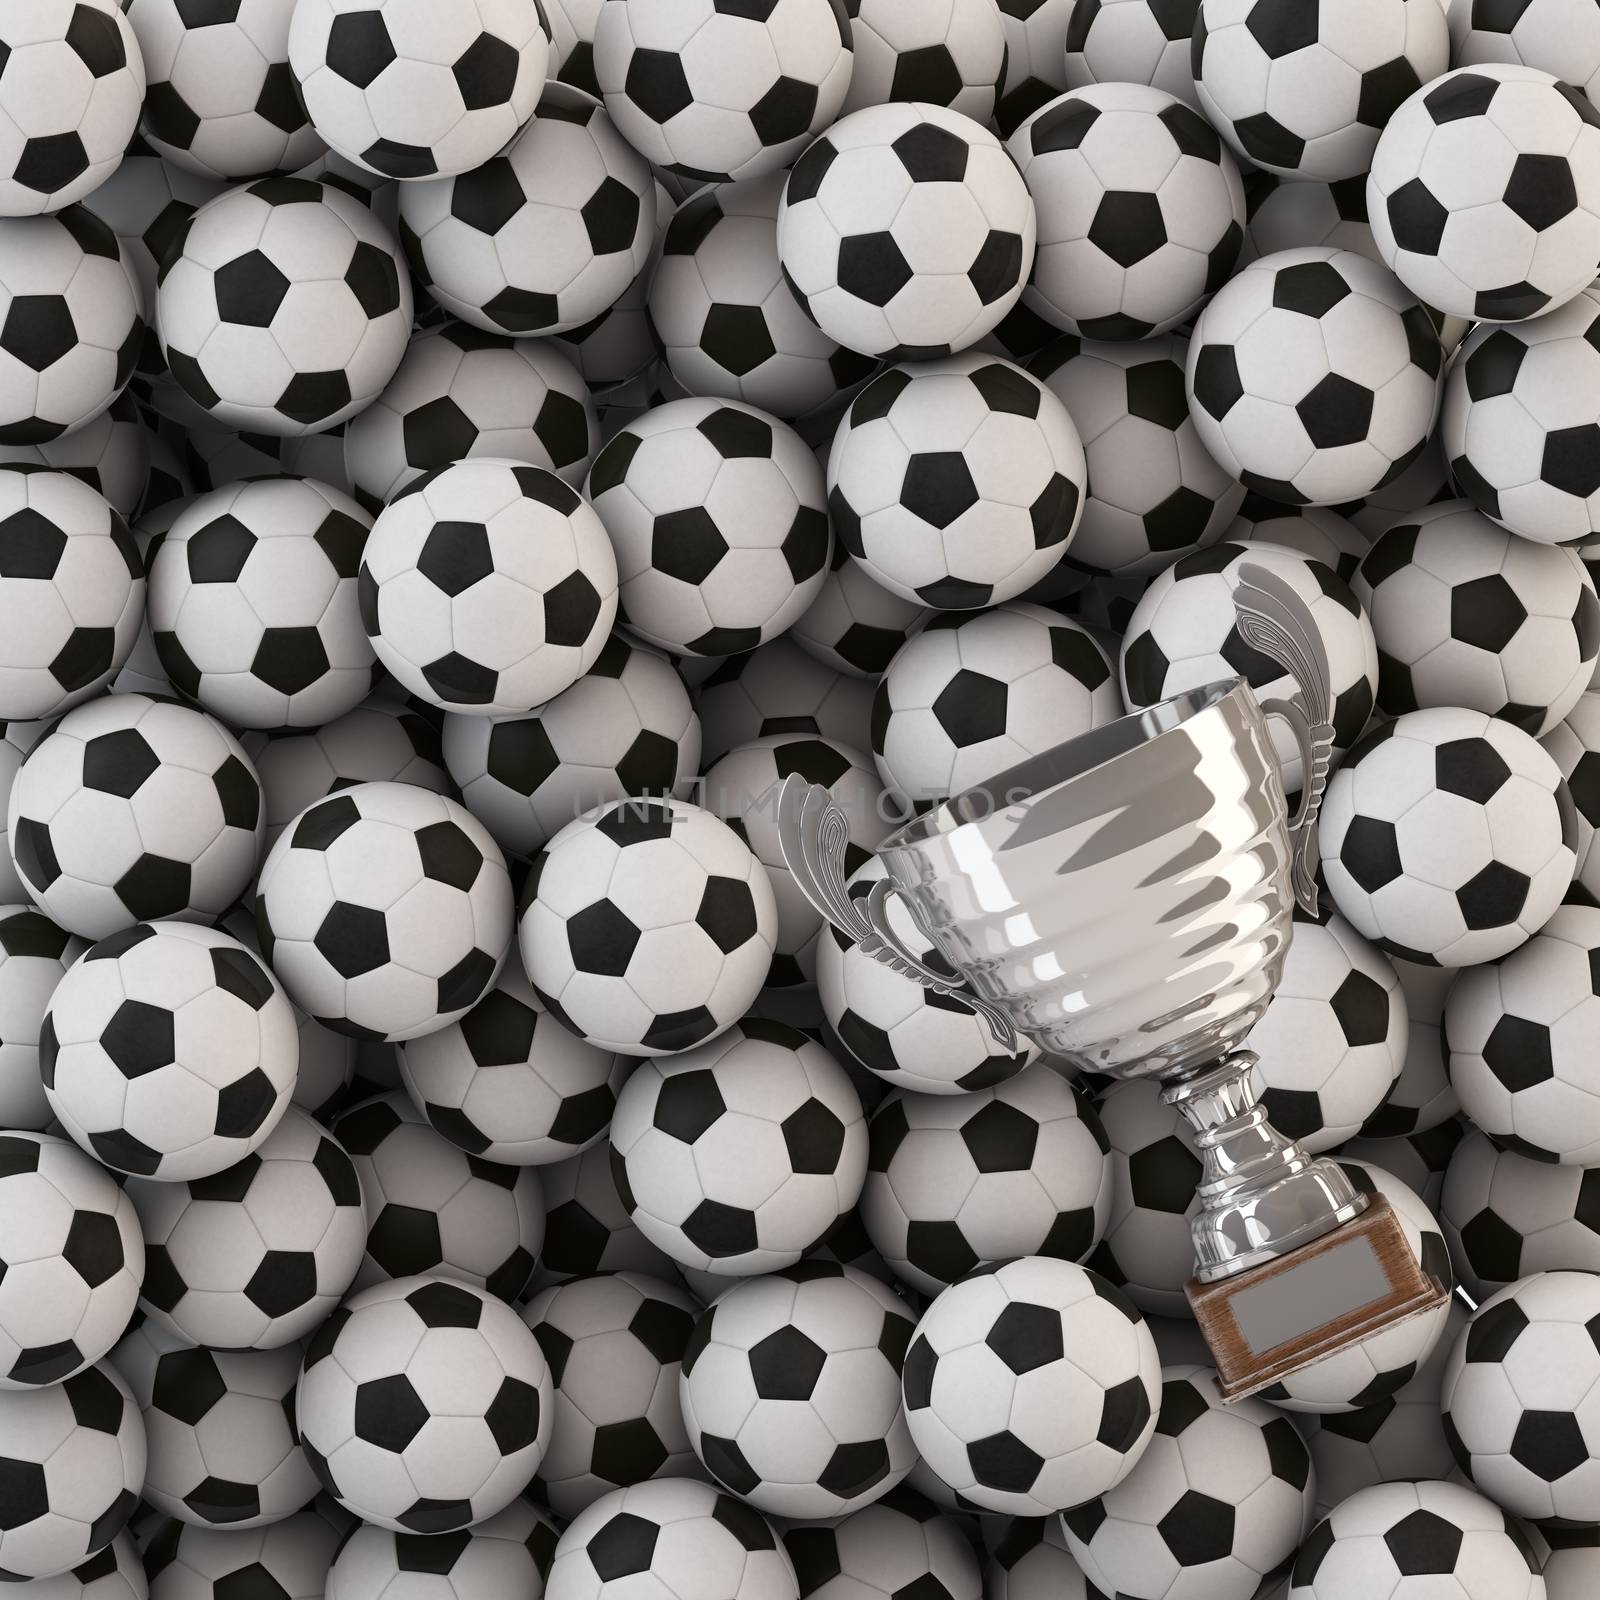 Soccer Ball and Goblet Background with Work Path Included